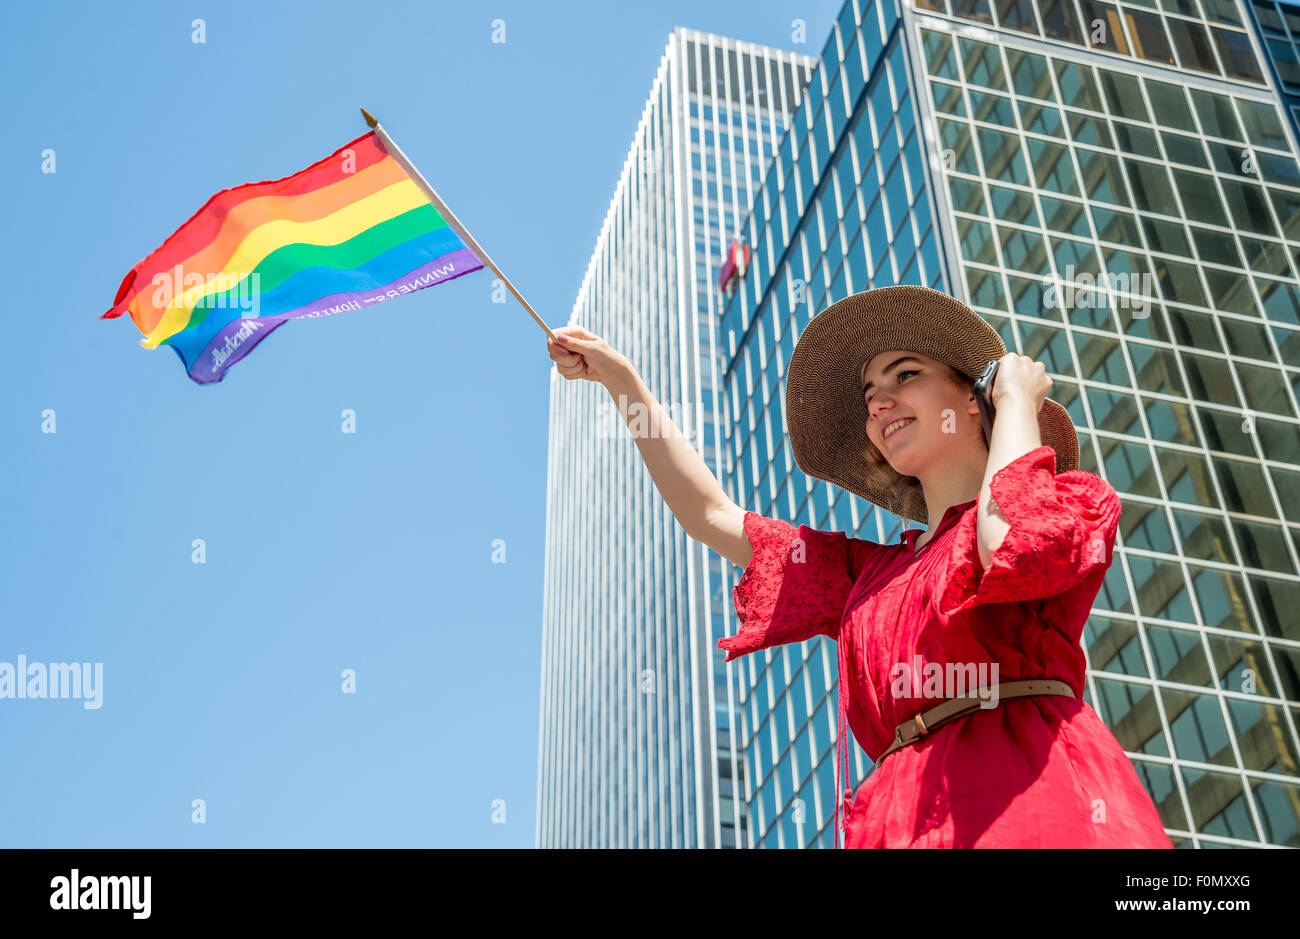 MONTREAL, CANADA, 16th August 2015. A female spectator is waving the gay rainbow flag at the 2015 Gay Pride Parade in Montreal. © Marc Bruxelle/Alamy Live News Stock Photo